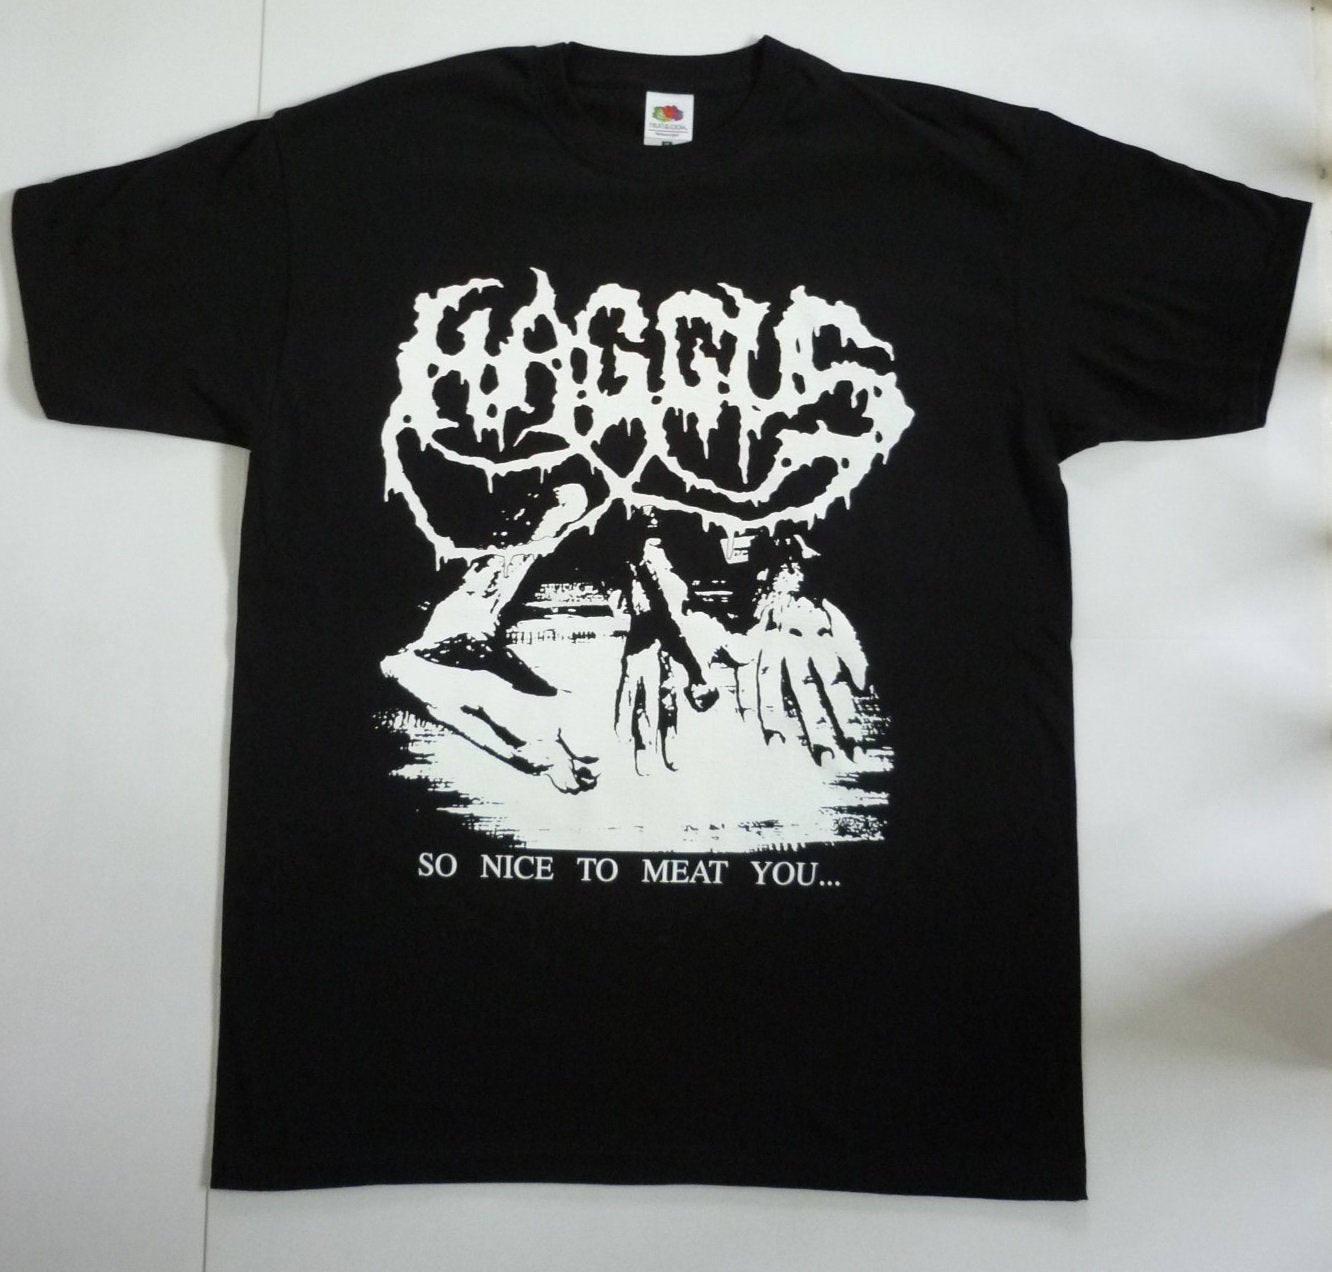 Haggus - So Nice To Meat You - T-shirt